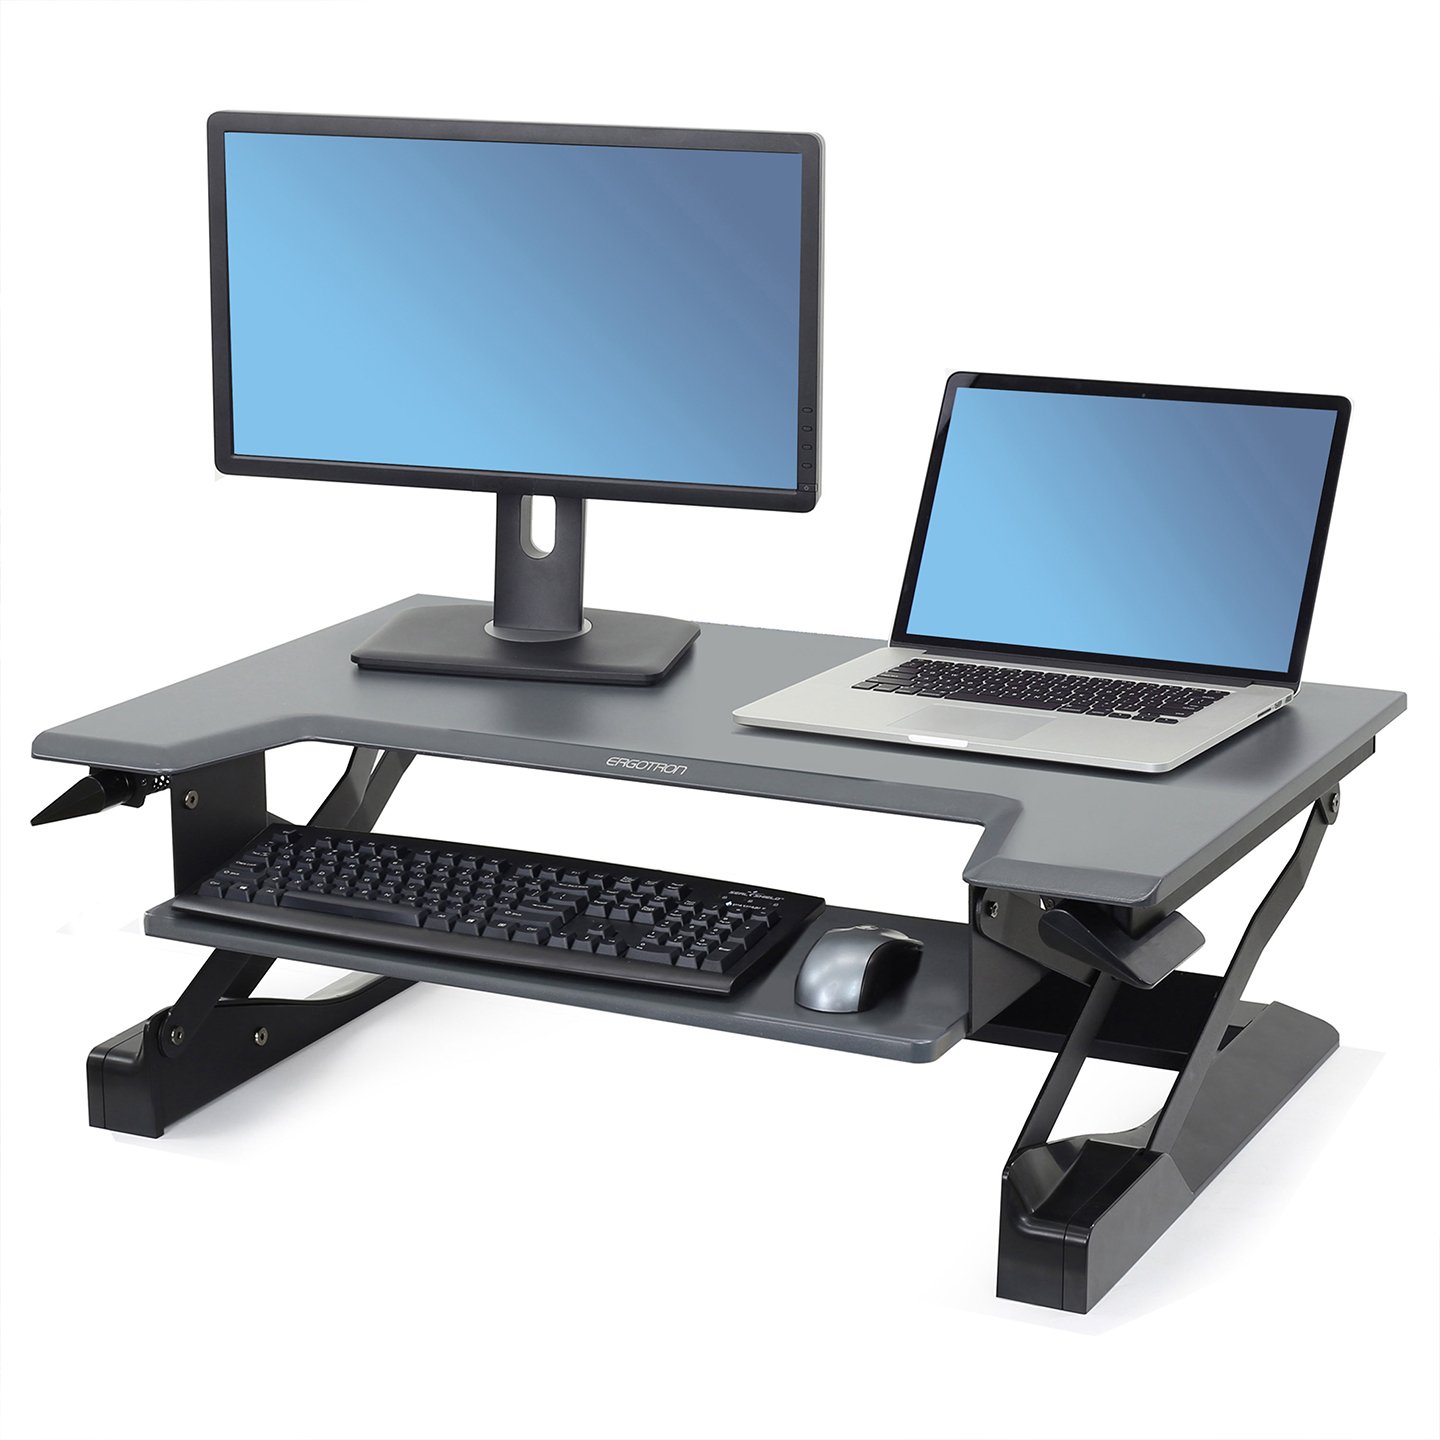 Haworth Sit Stand Work Station Accessories set up with keyboard, mouse, laptop, and monitor